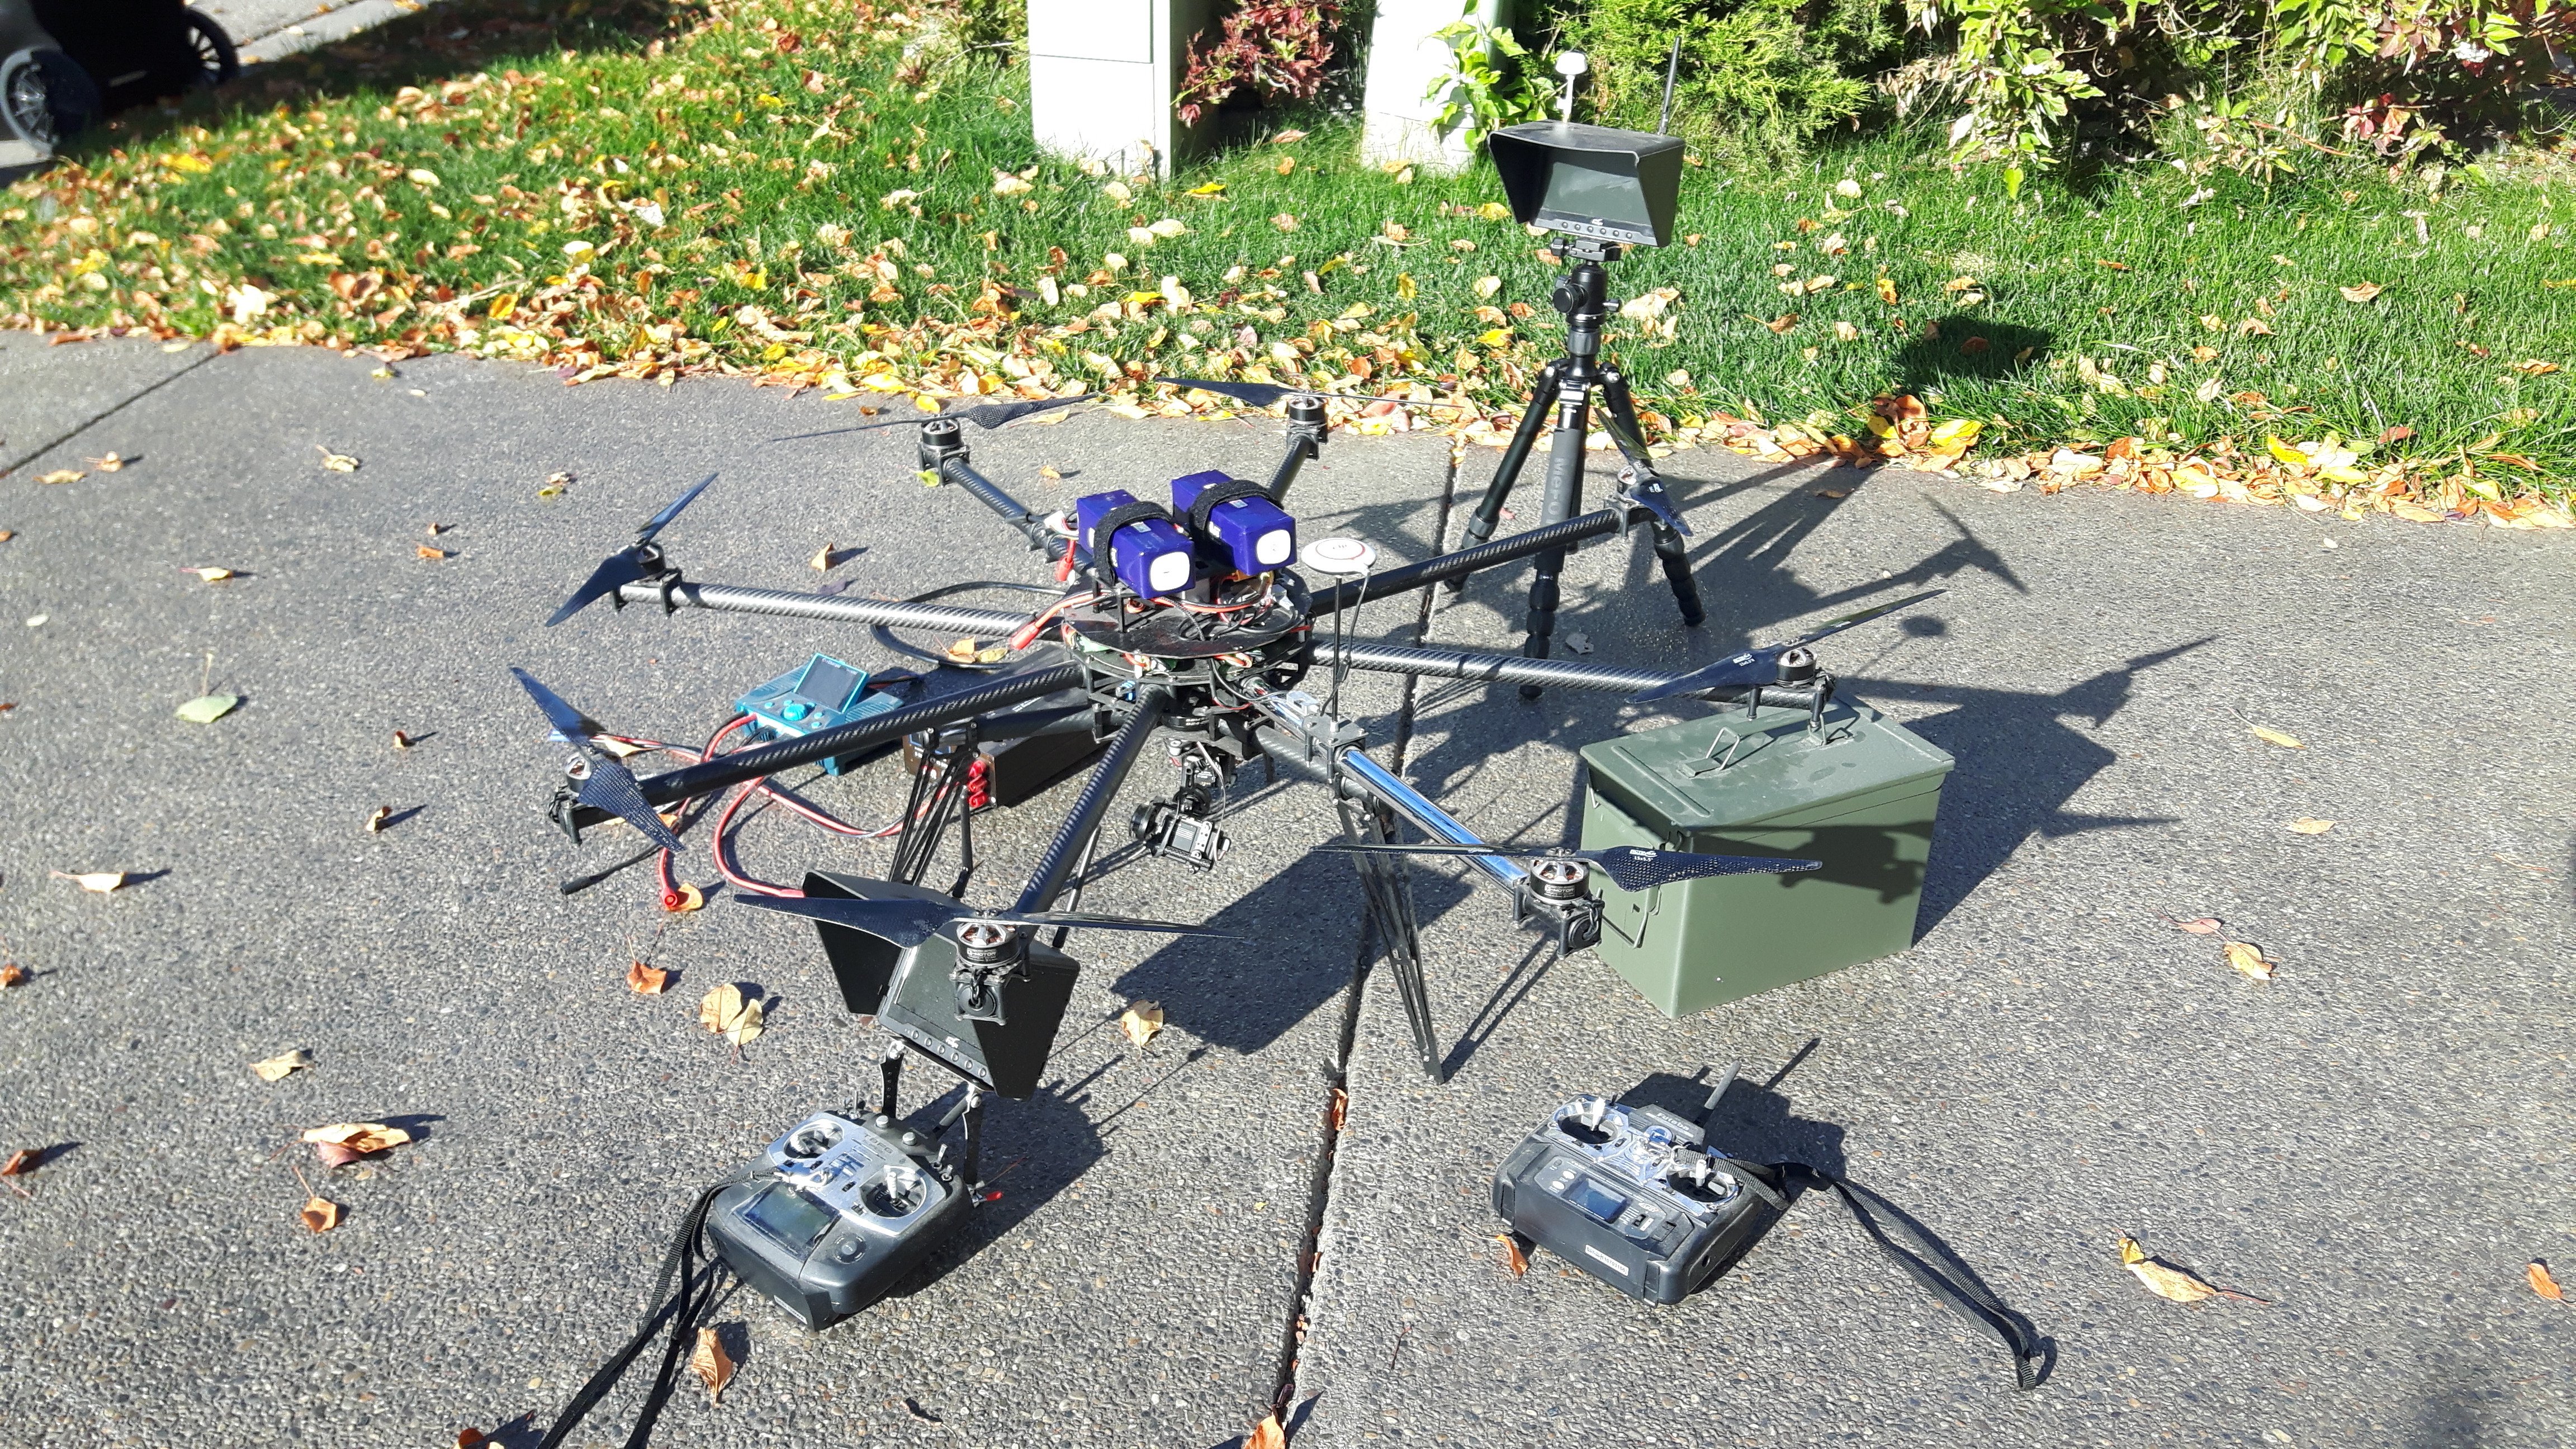 Octocopter system